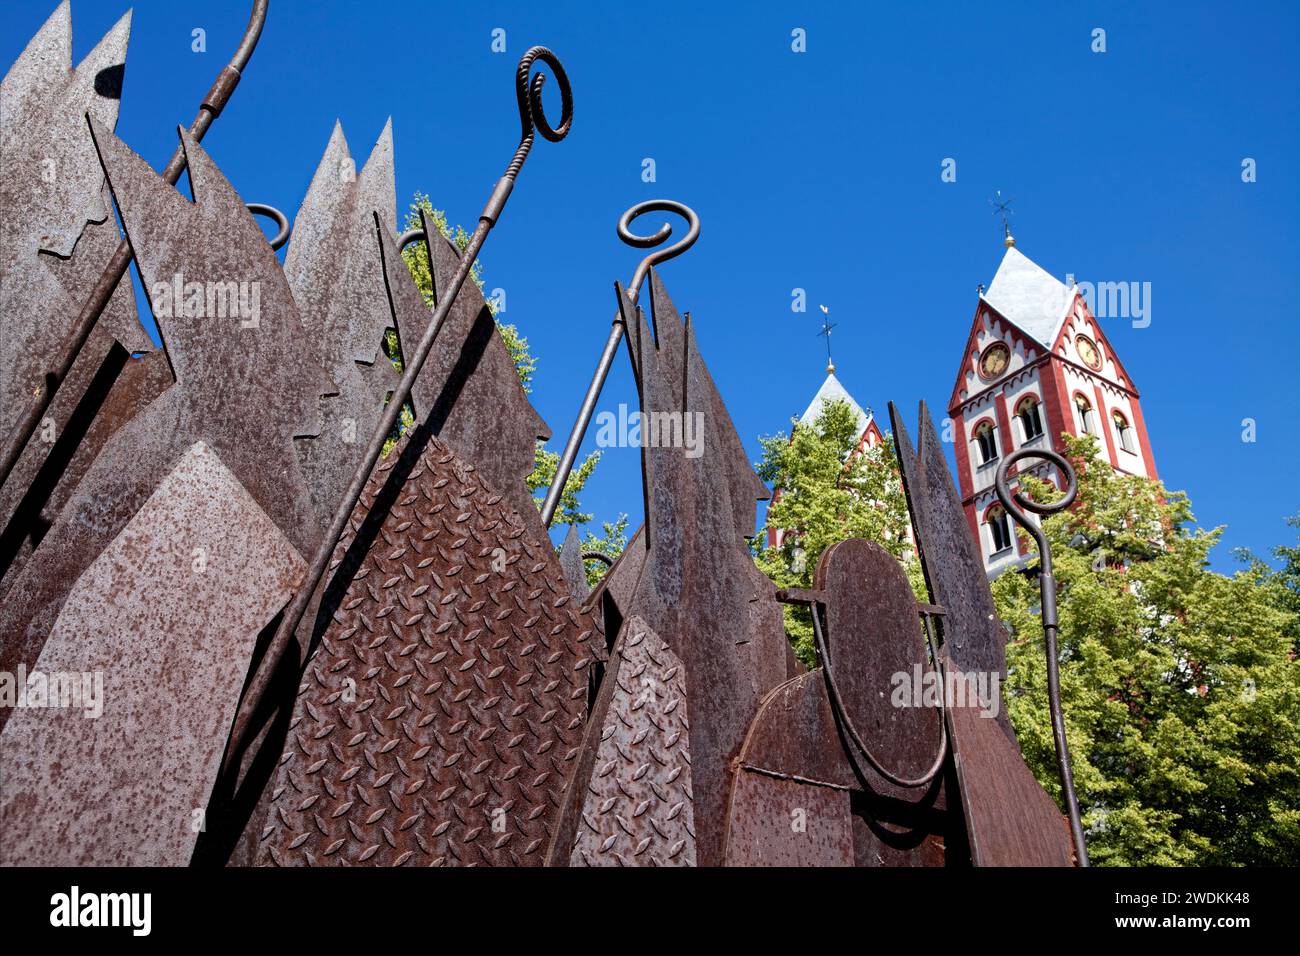 The sculpture group “Les Principautaires” by Mady Andrien, Church of St. Bartholomew, Liège, Belgium, Europe Stock Photo